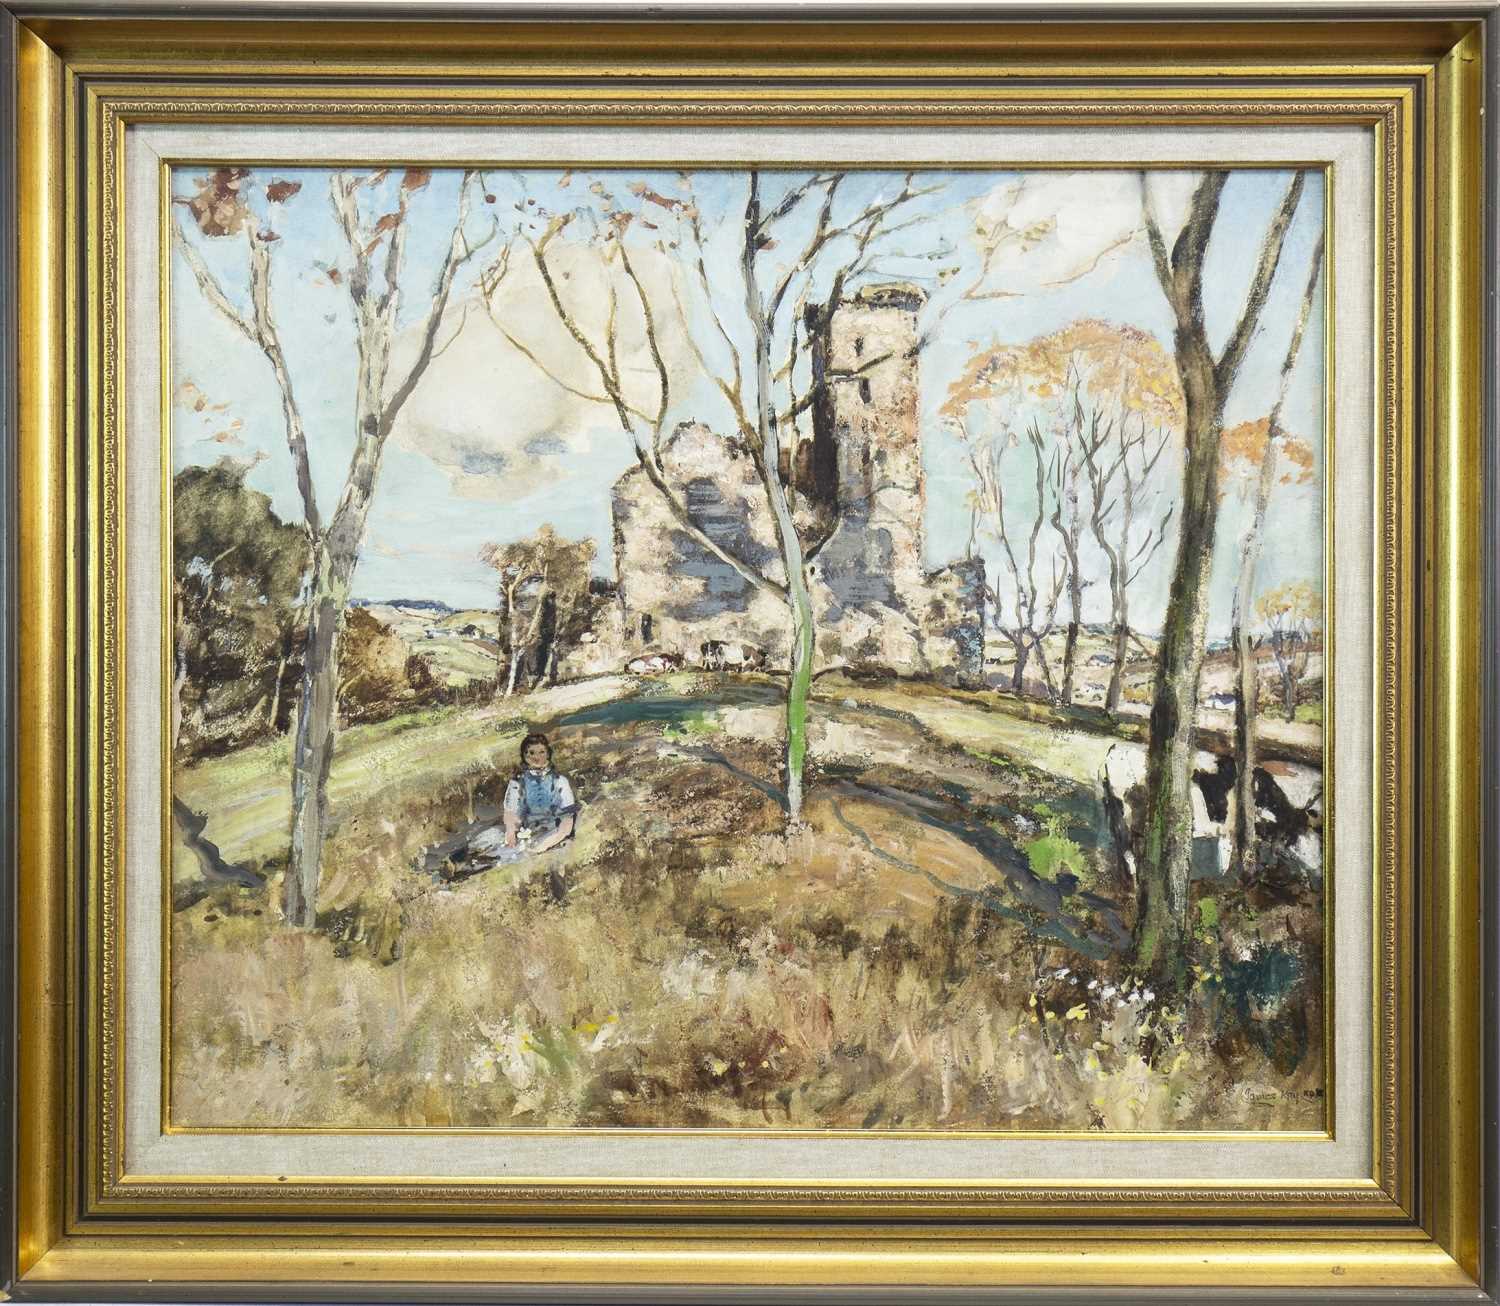 Lot 425 - CASTLE RUIN WITH FIGURE, A MIXED MEDIA BY JAMES KAY